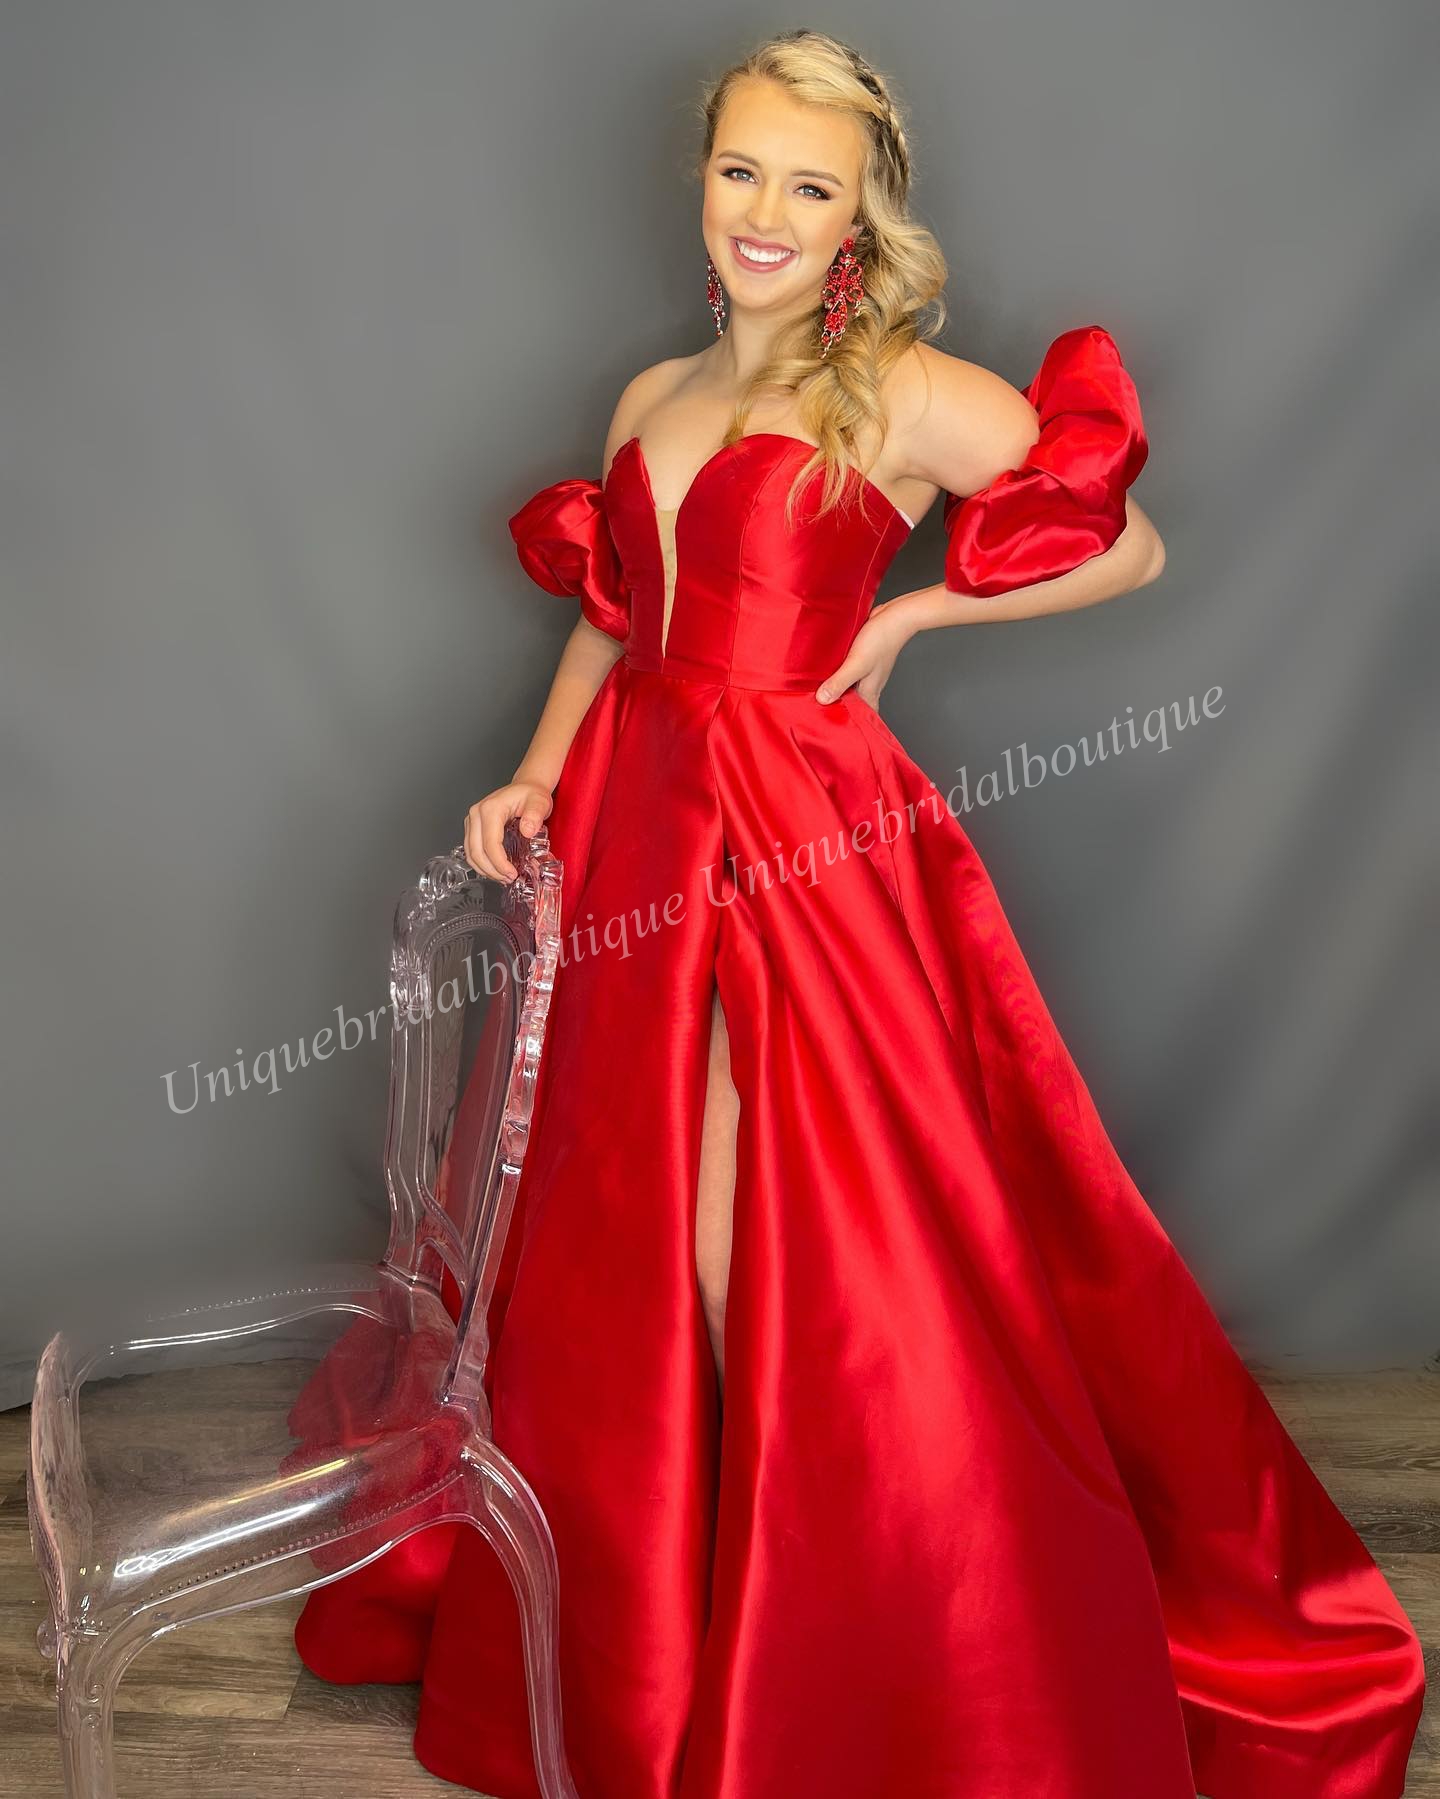 Sweetheart A-line Prom Dress 2k23 V-Neckline High Slit Puffy Attachable Sleeves Pageant Formal Evening Event Party Runway Black-Tie Gala Wedding Guest Gown Red Carpet